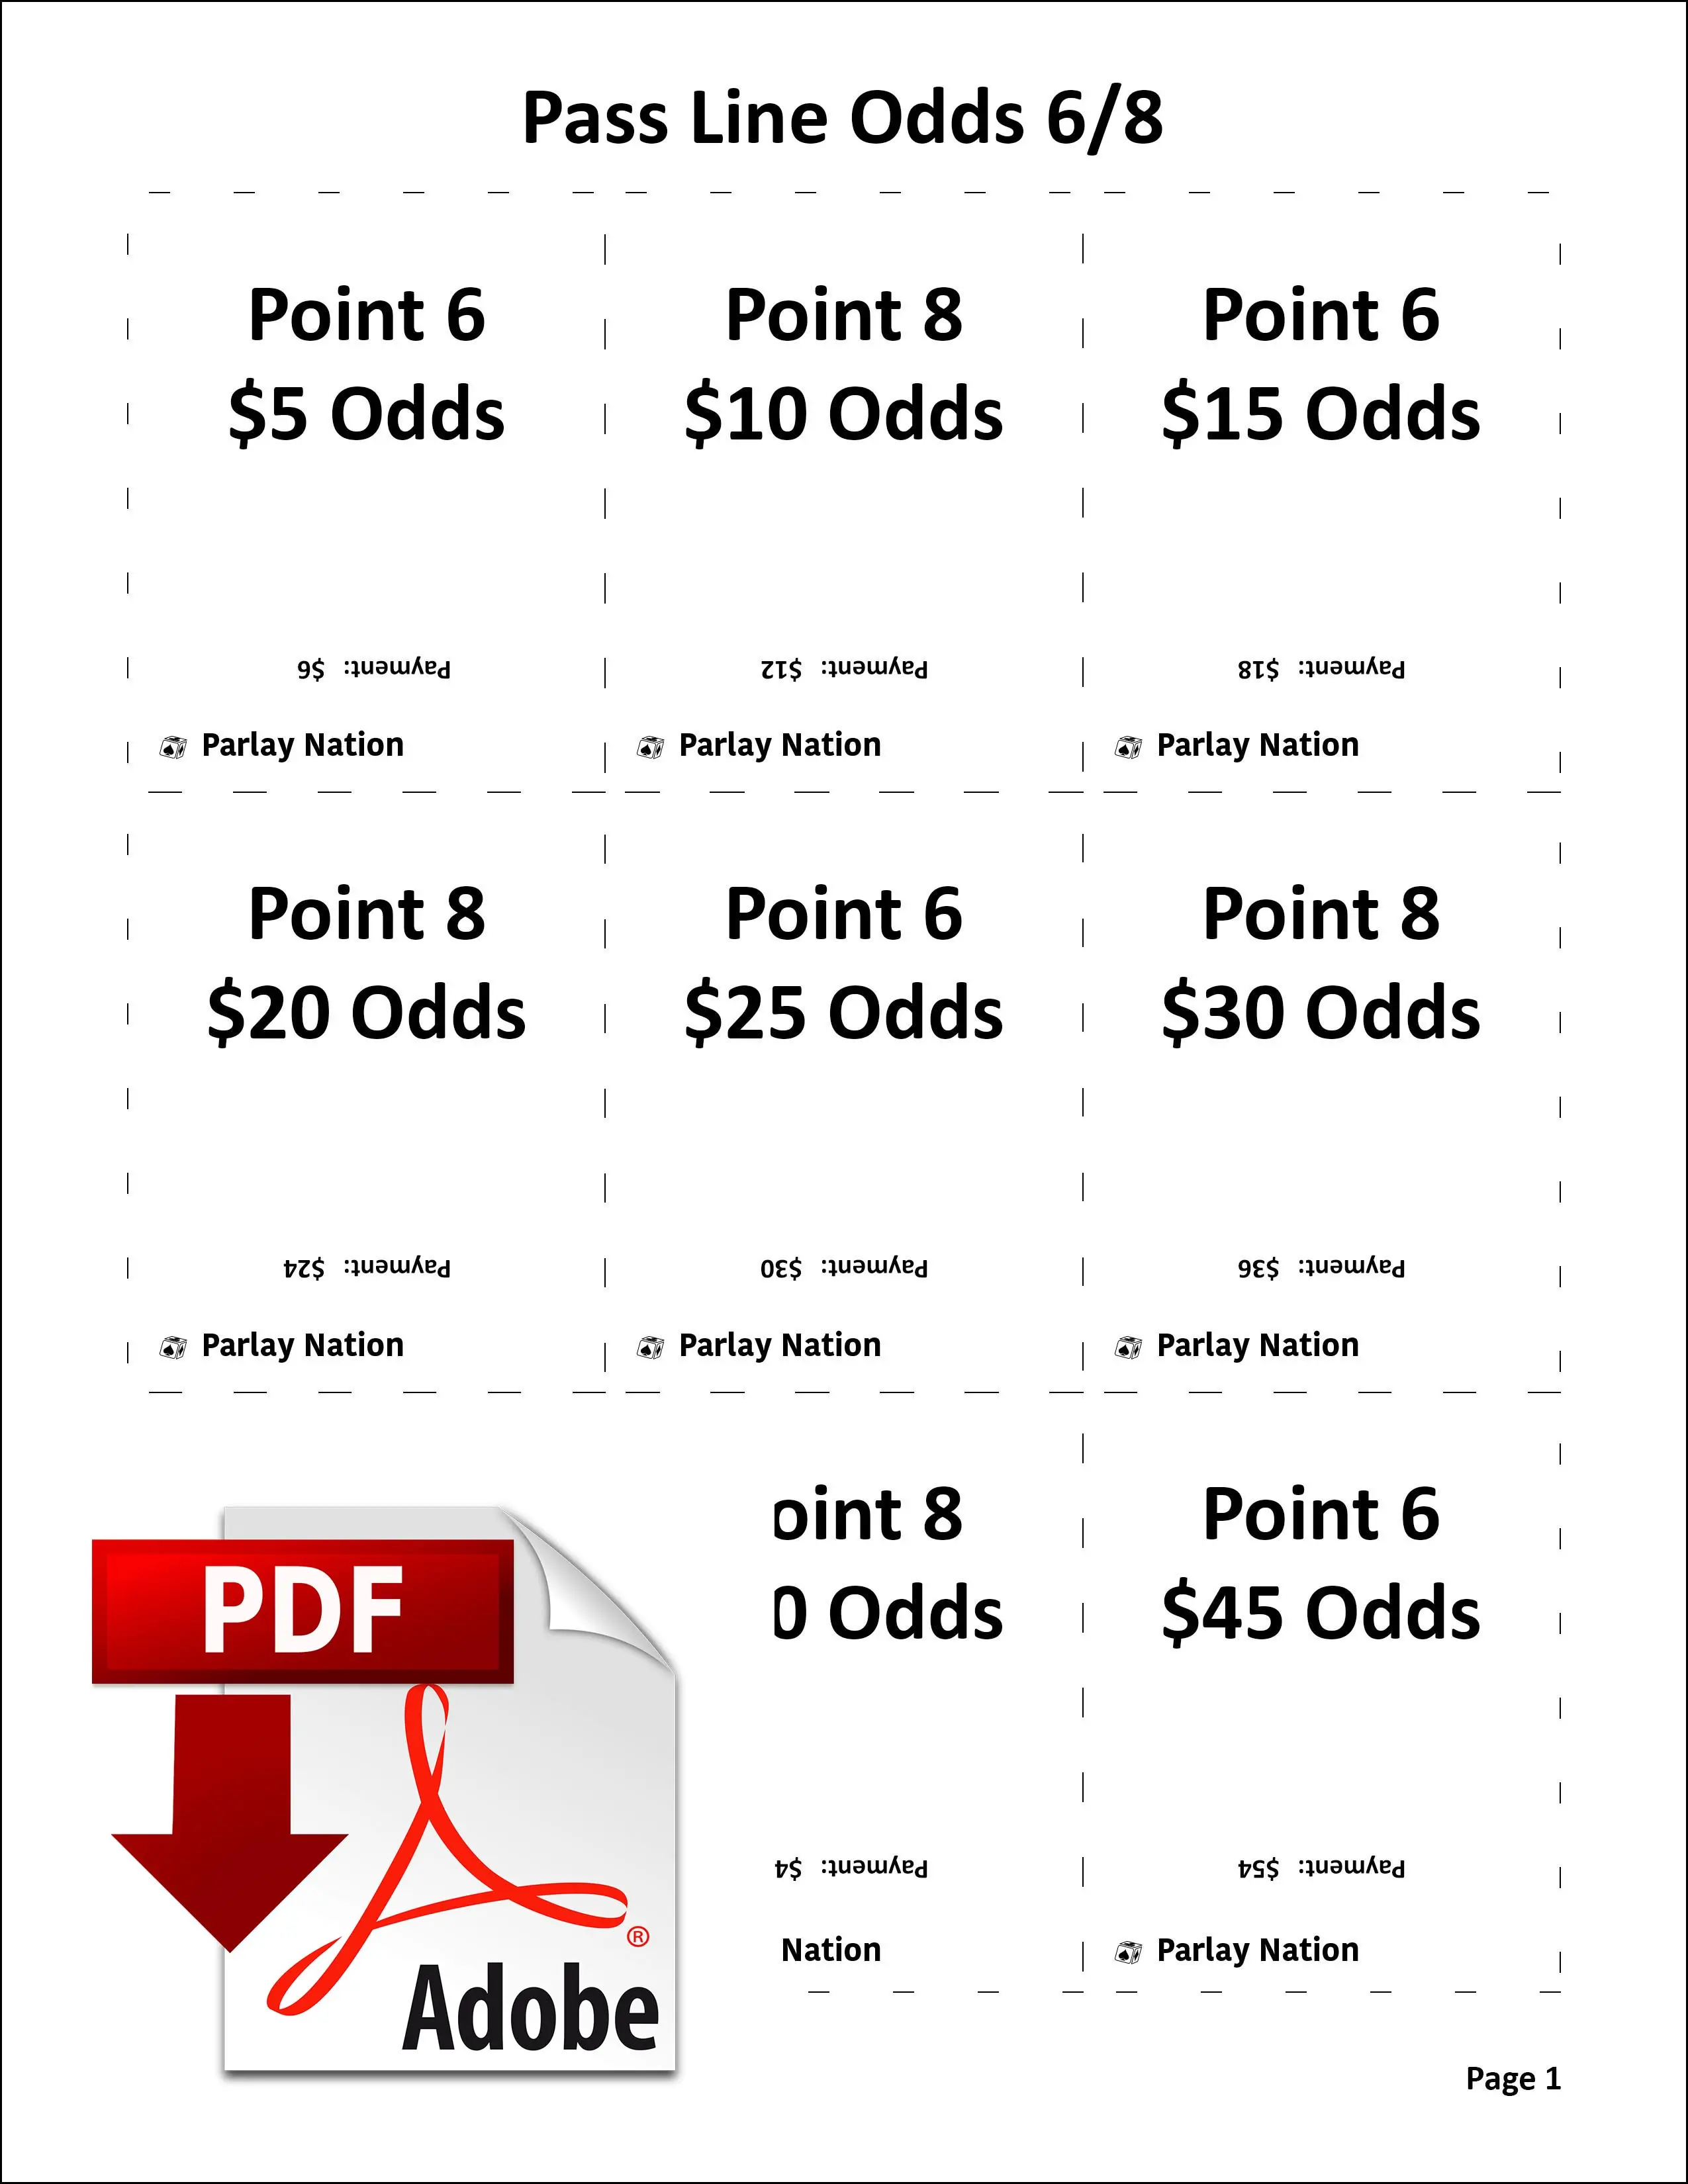 Pass Line Odds Payments 6 & 8 cover sheet.